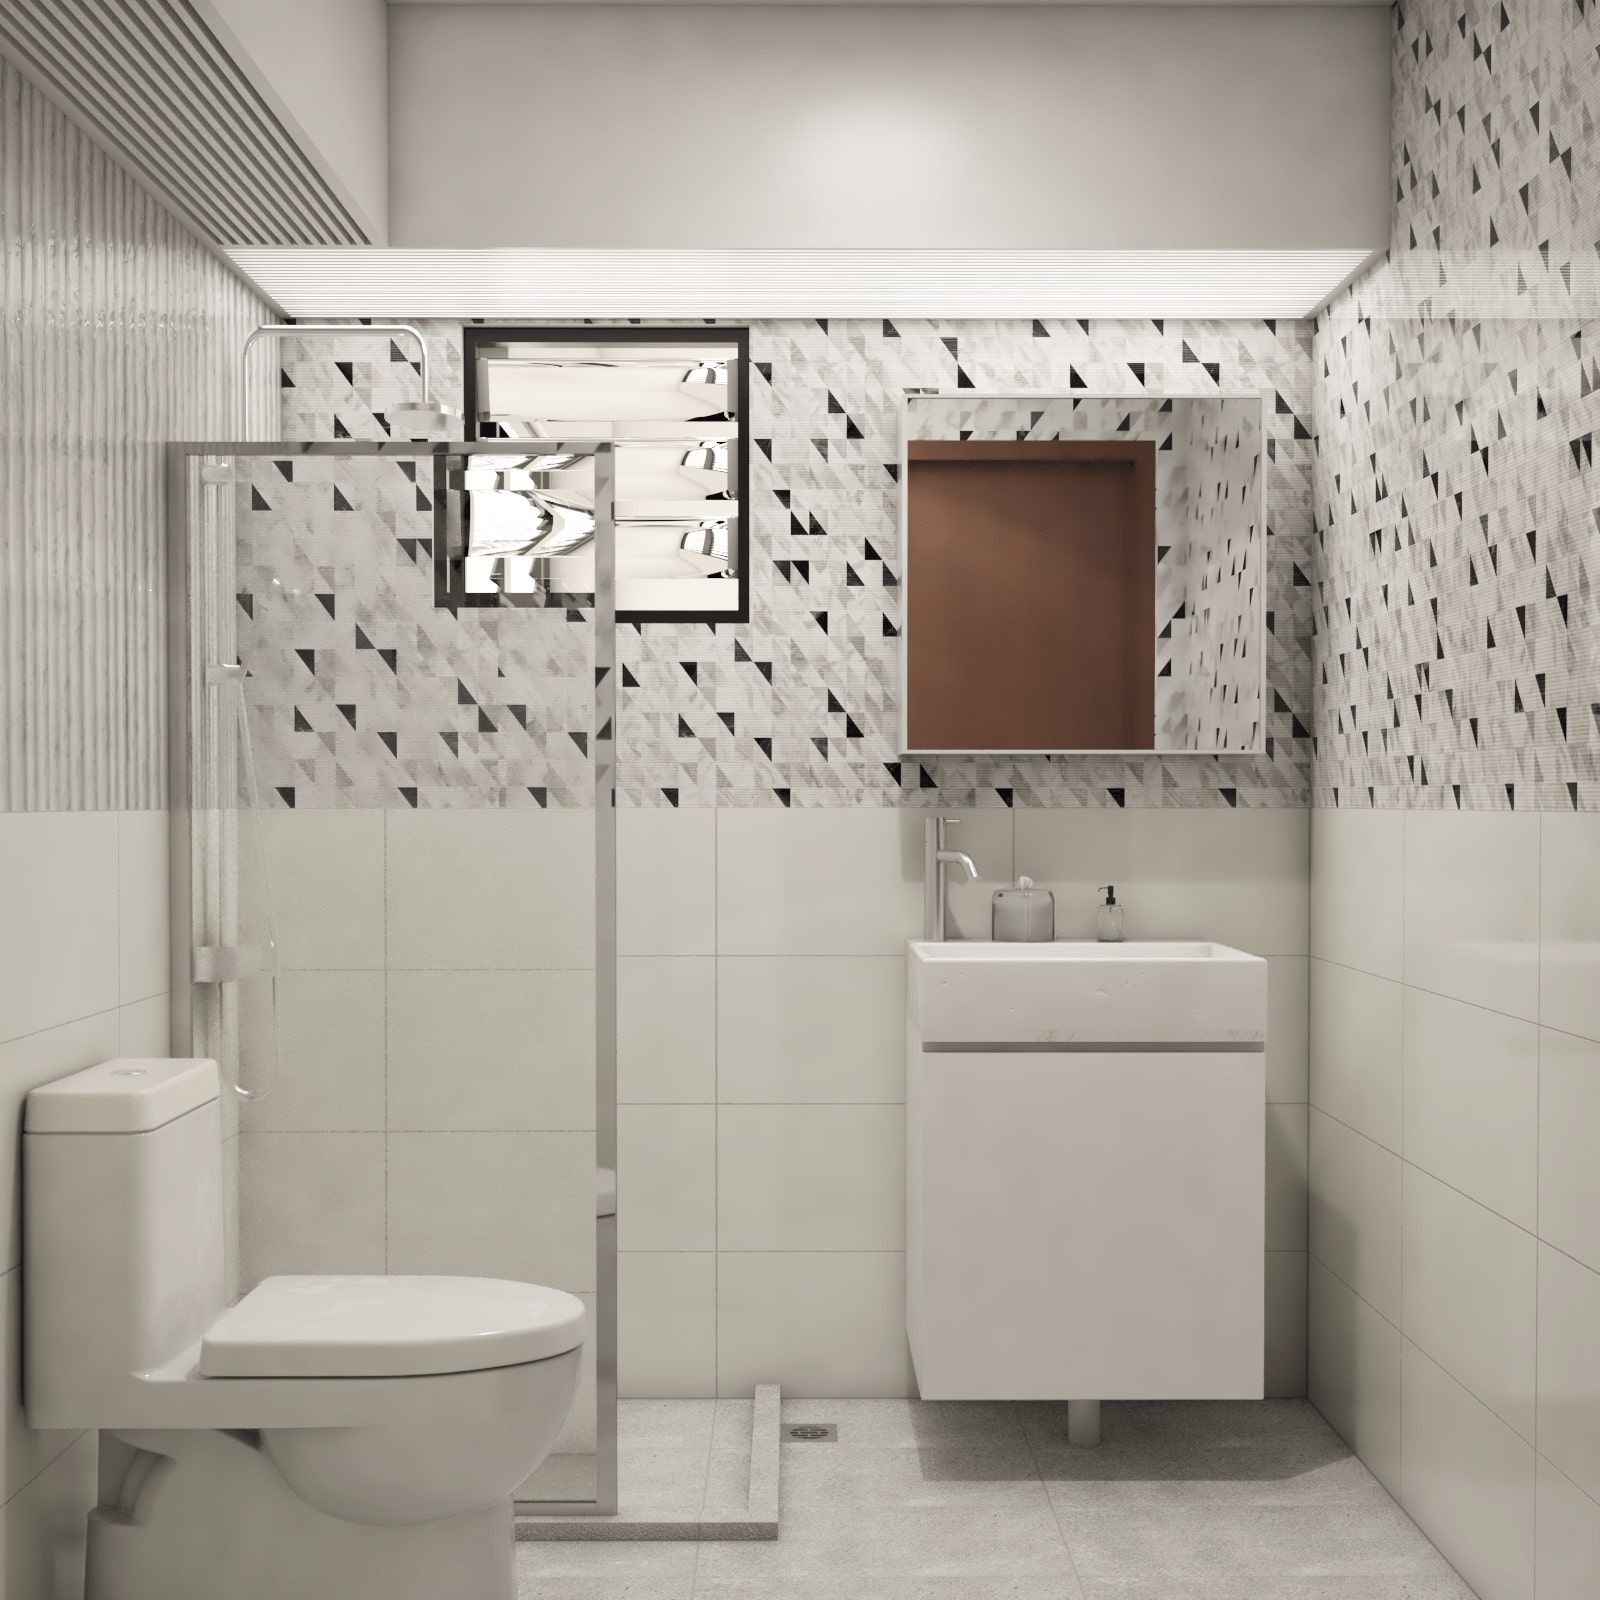 Contemporary Bathroom Design With Printed Wall Tiles And White Fixtures